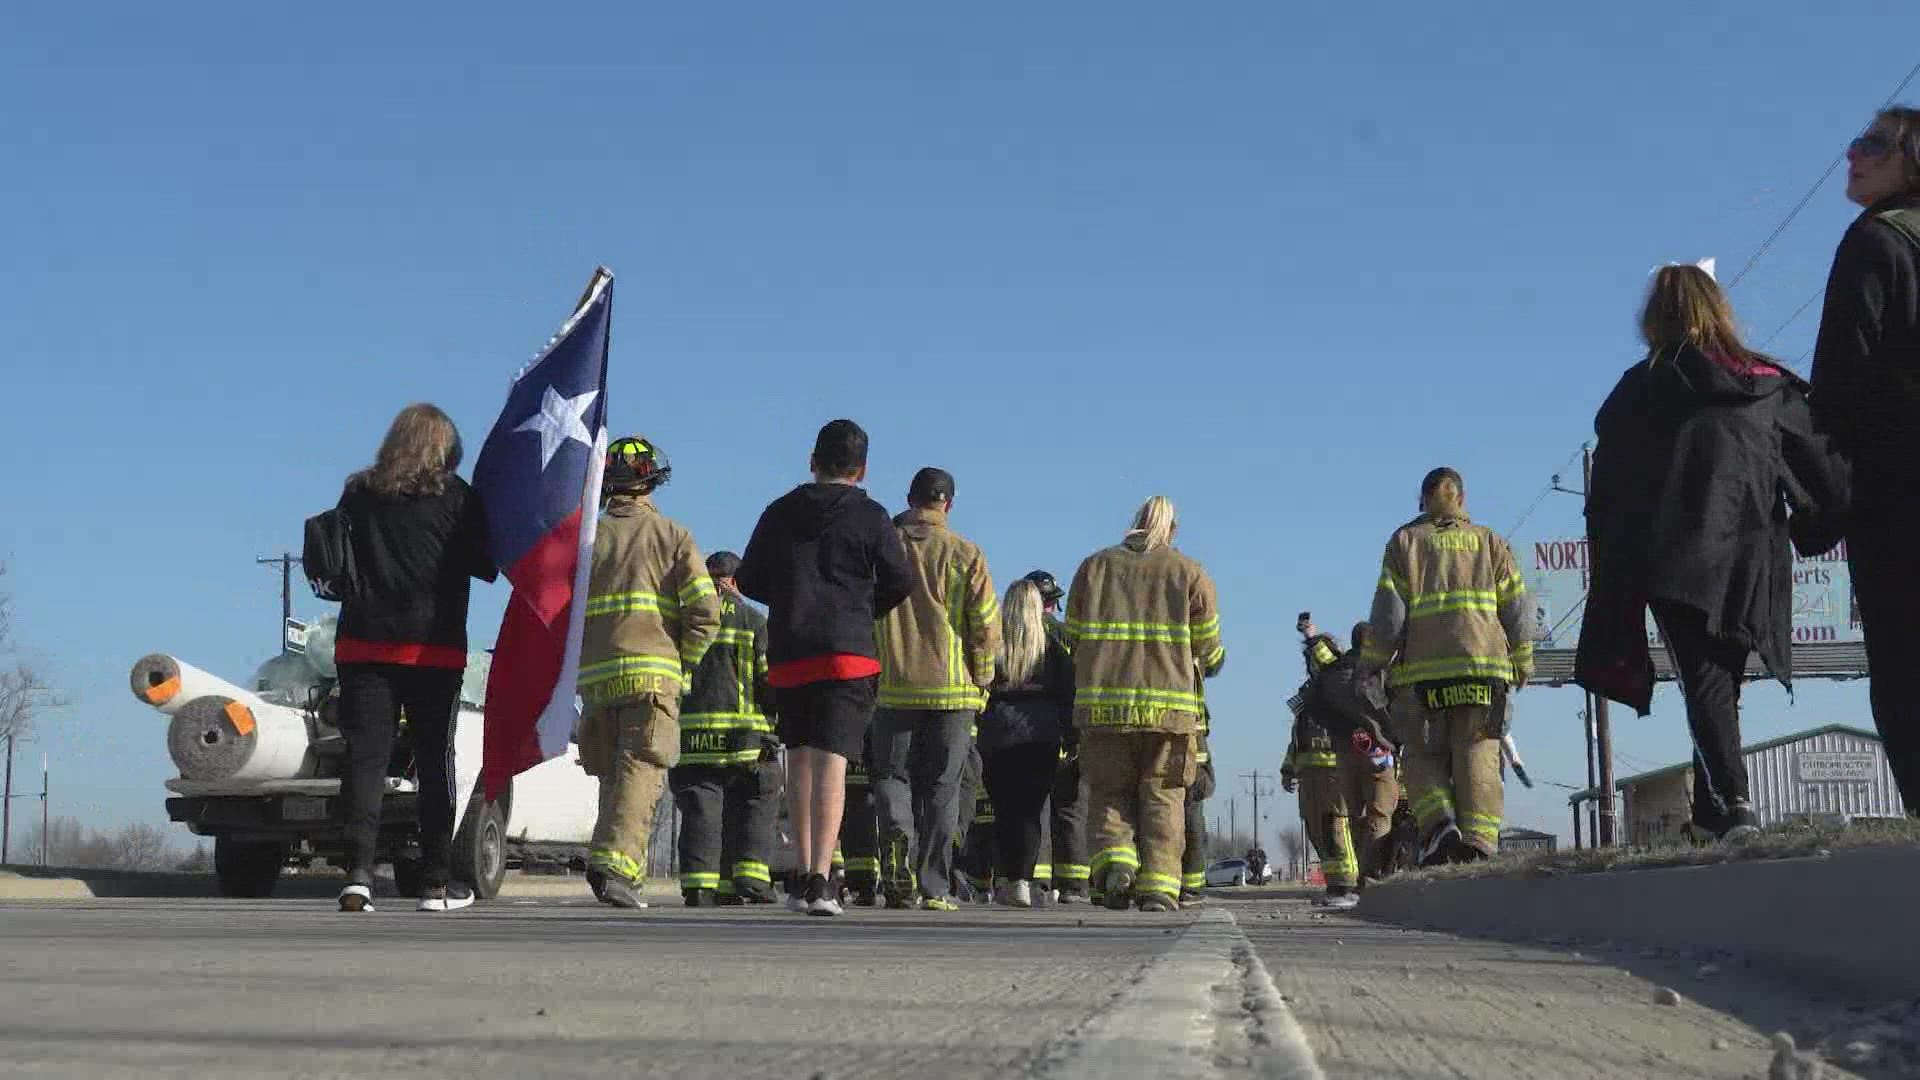 Firefighters and family members finished a 140-mile walk from Celina to Plano to honor firefighters with cancer. It is the leading cause of death in firefighters.